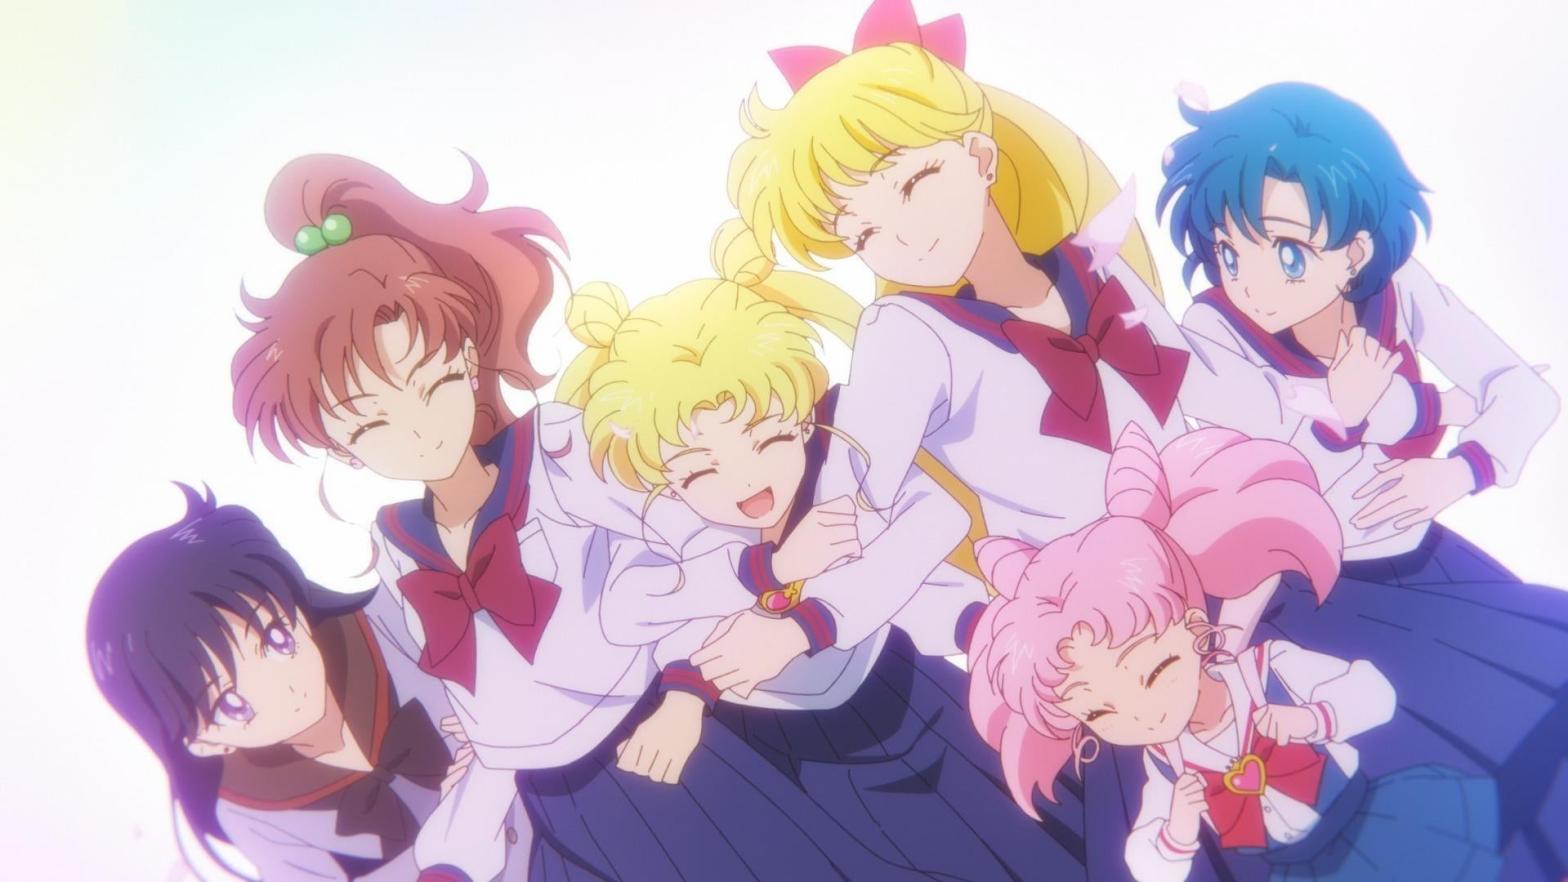 The Sailor Scouts in a more peaceful moment. (Image: Netflix)